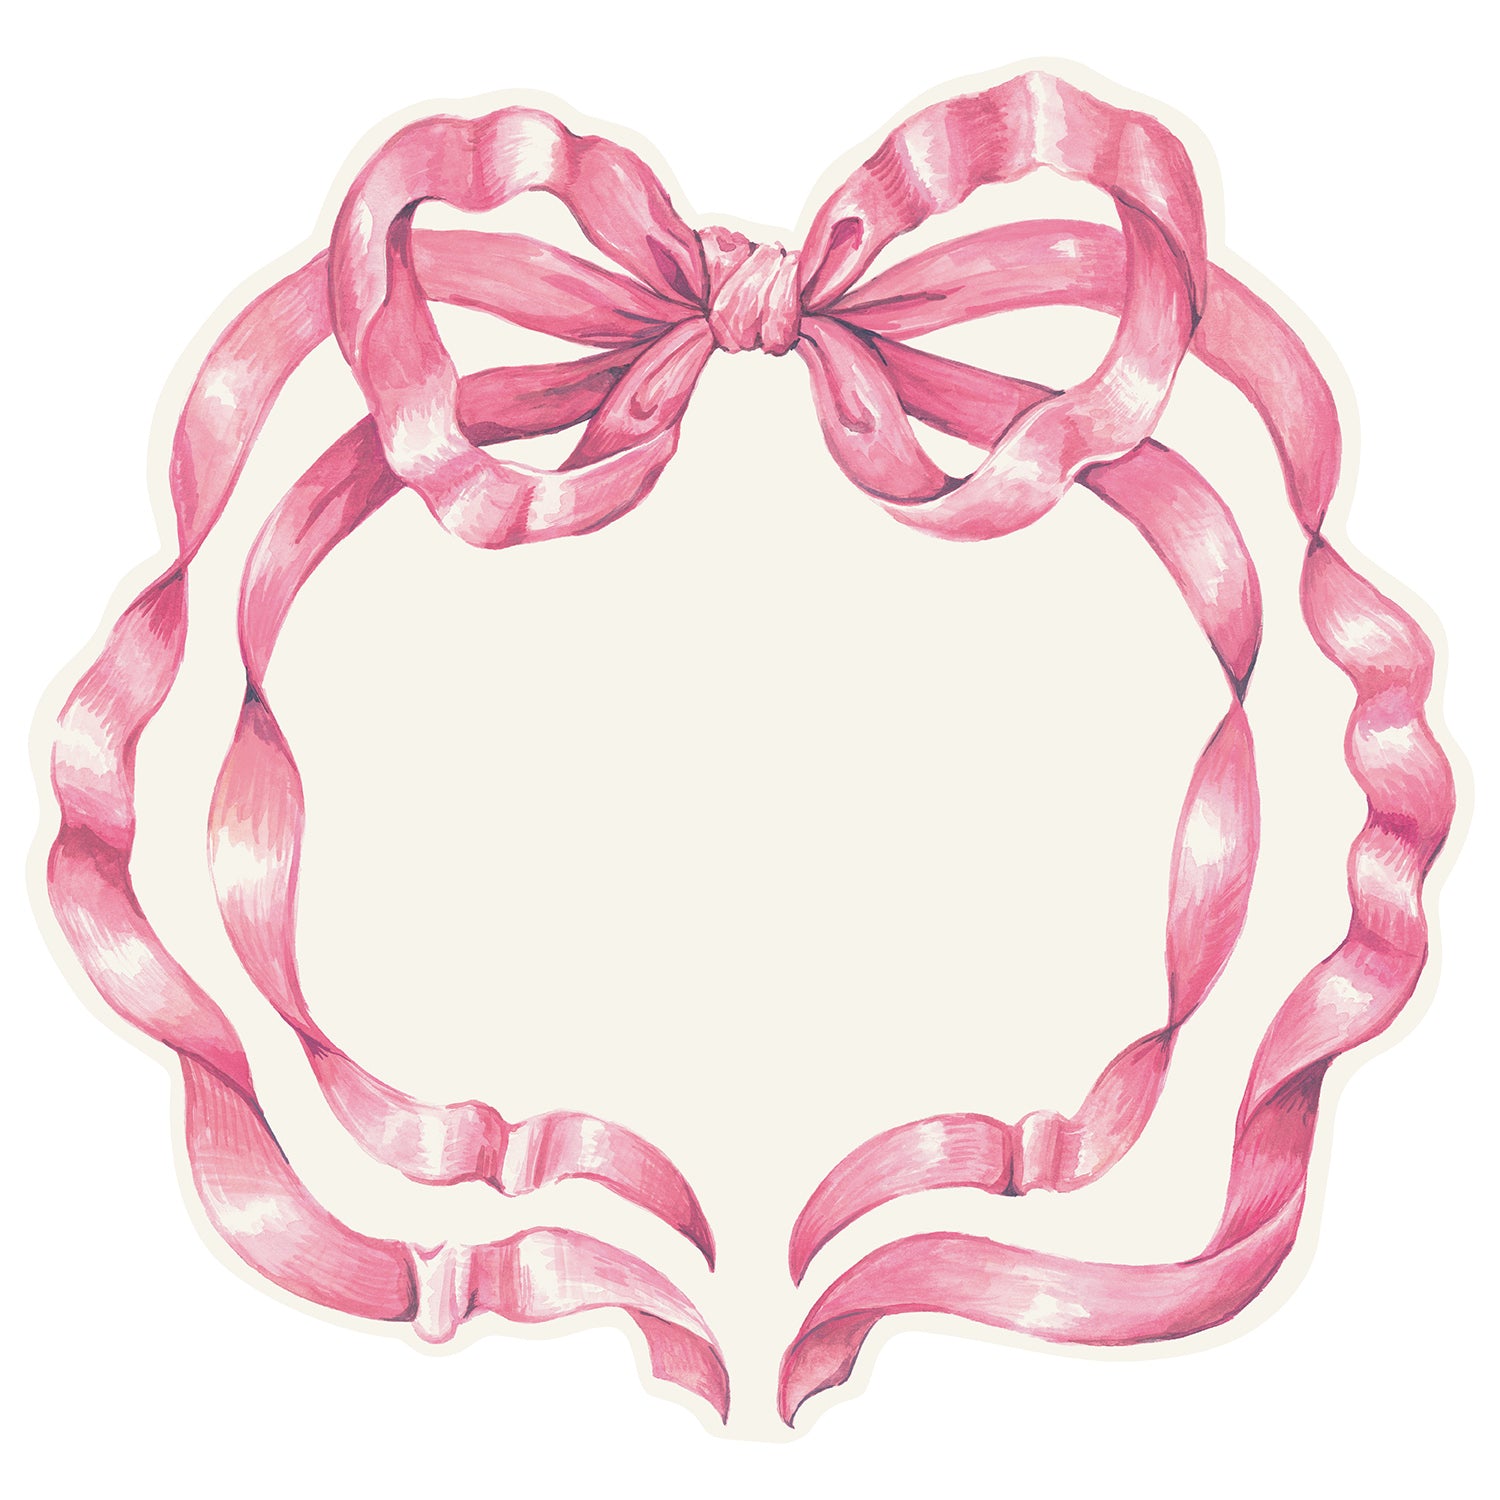 A Hester &amp; Cook Die-cut Pink Bow Placemat on a white background.